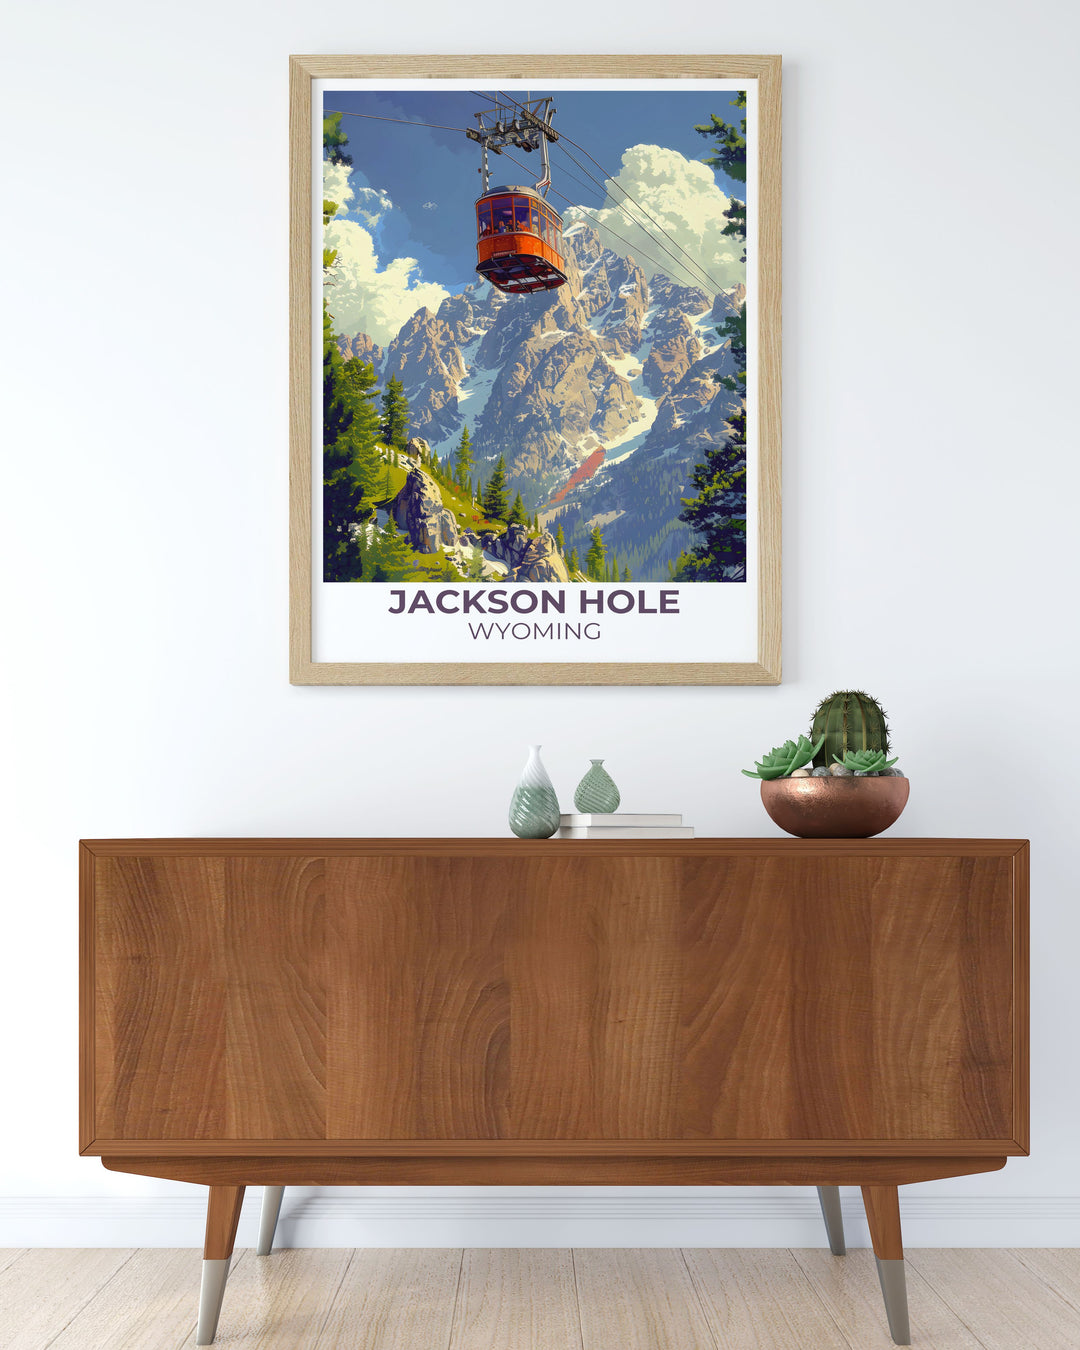 Customizable print of Jackson Hole tailored to fit personal decor style showcasing winter or summer scenes